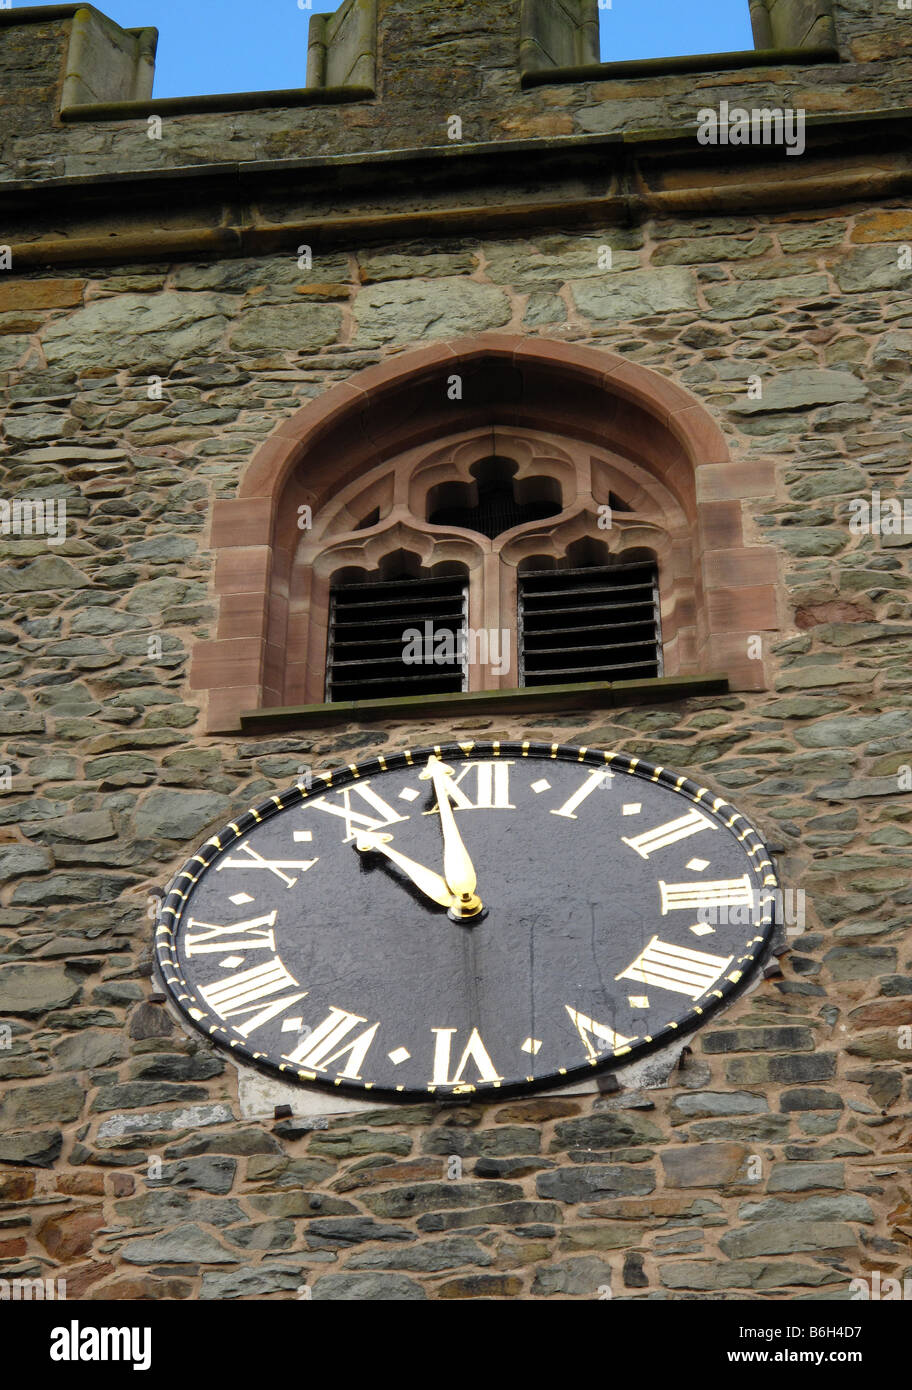 Stone church clock tower with metal clock face showing 11.59, stone mullion window above and castellations Stock Photo